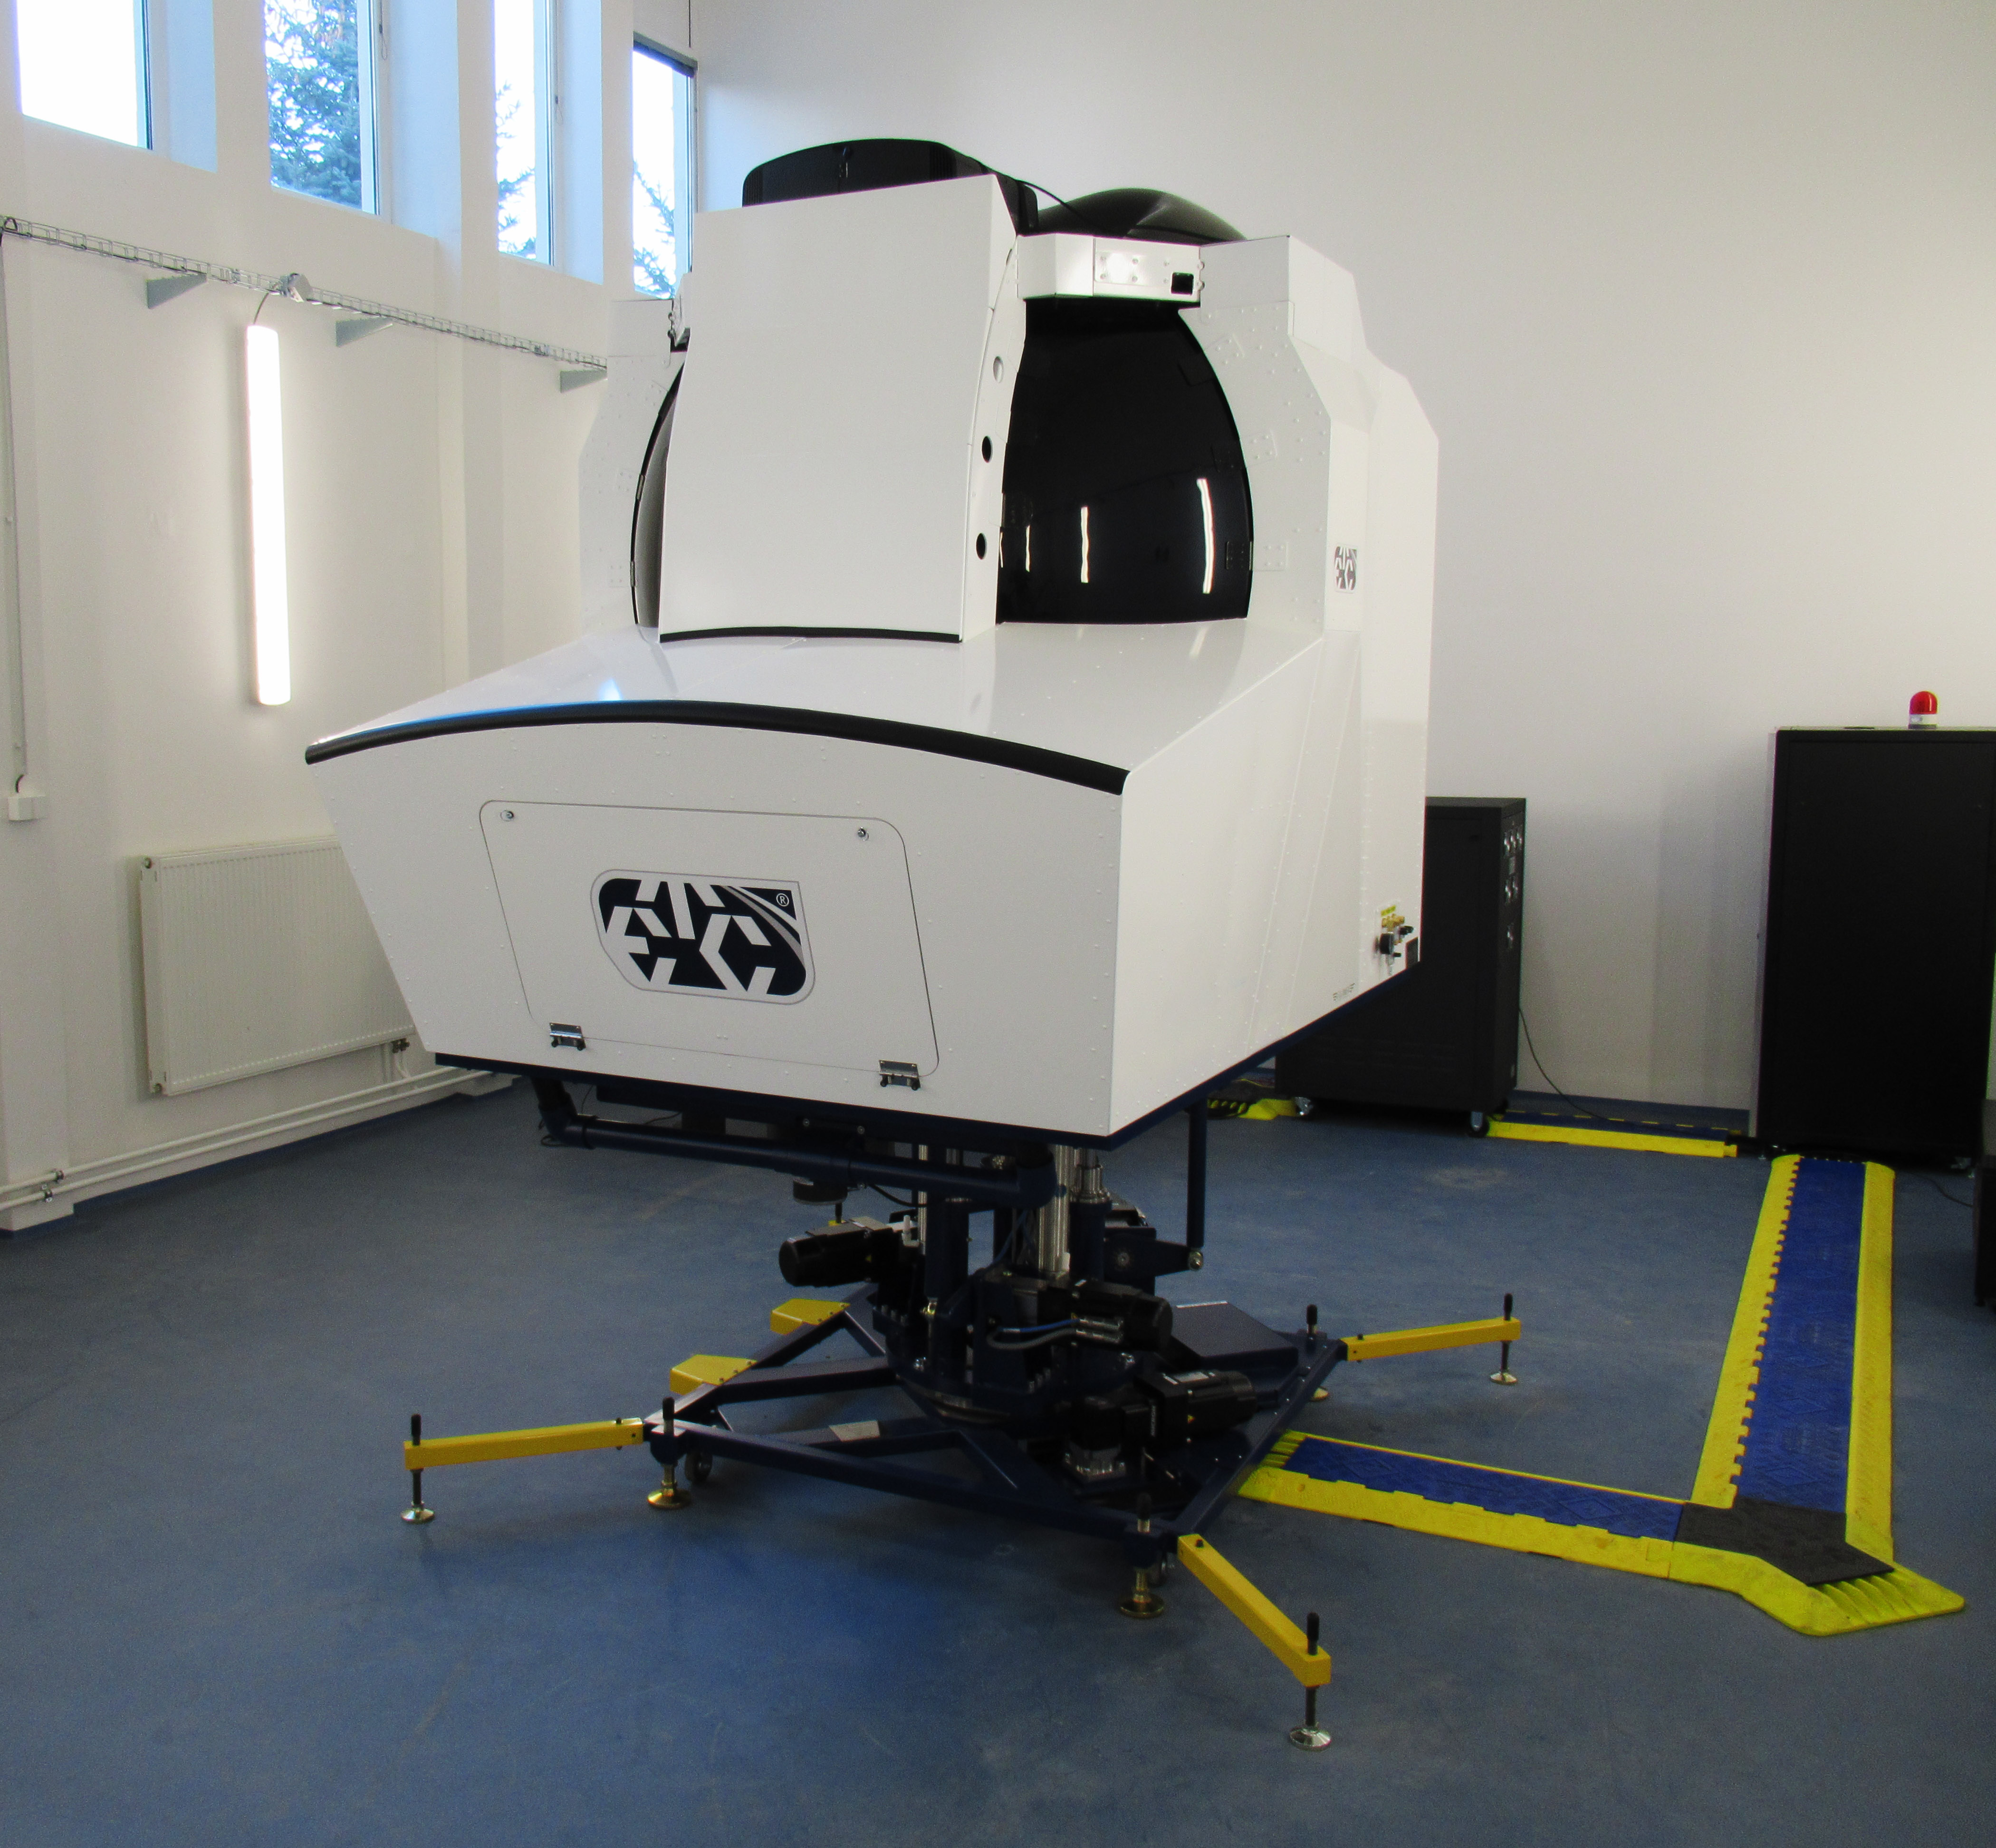 GH-200 Helicopter Spatial Disorientation Trainer